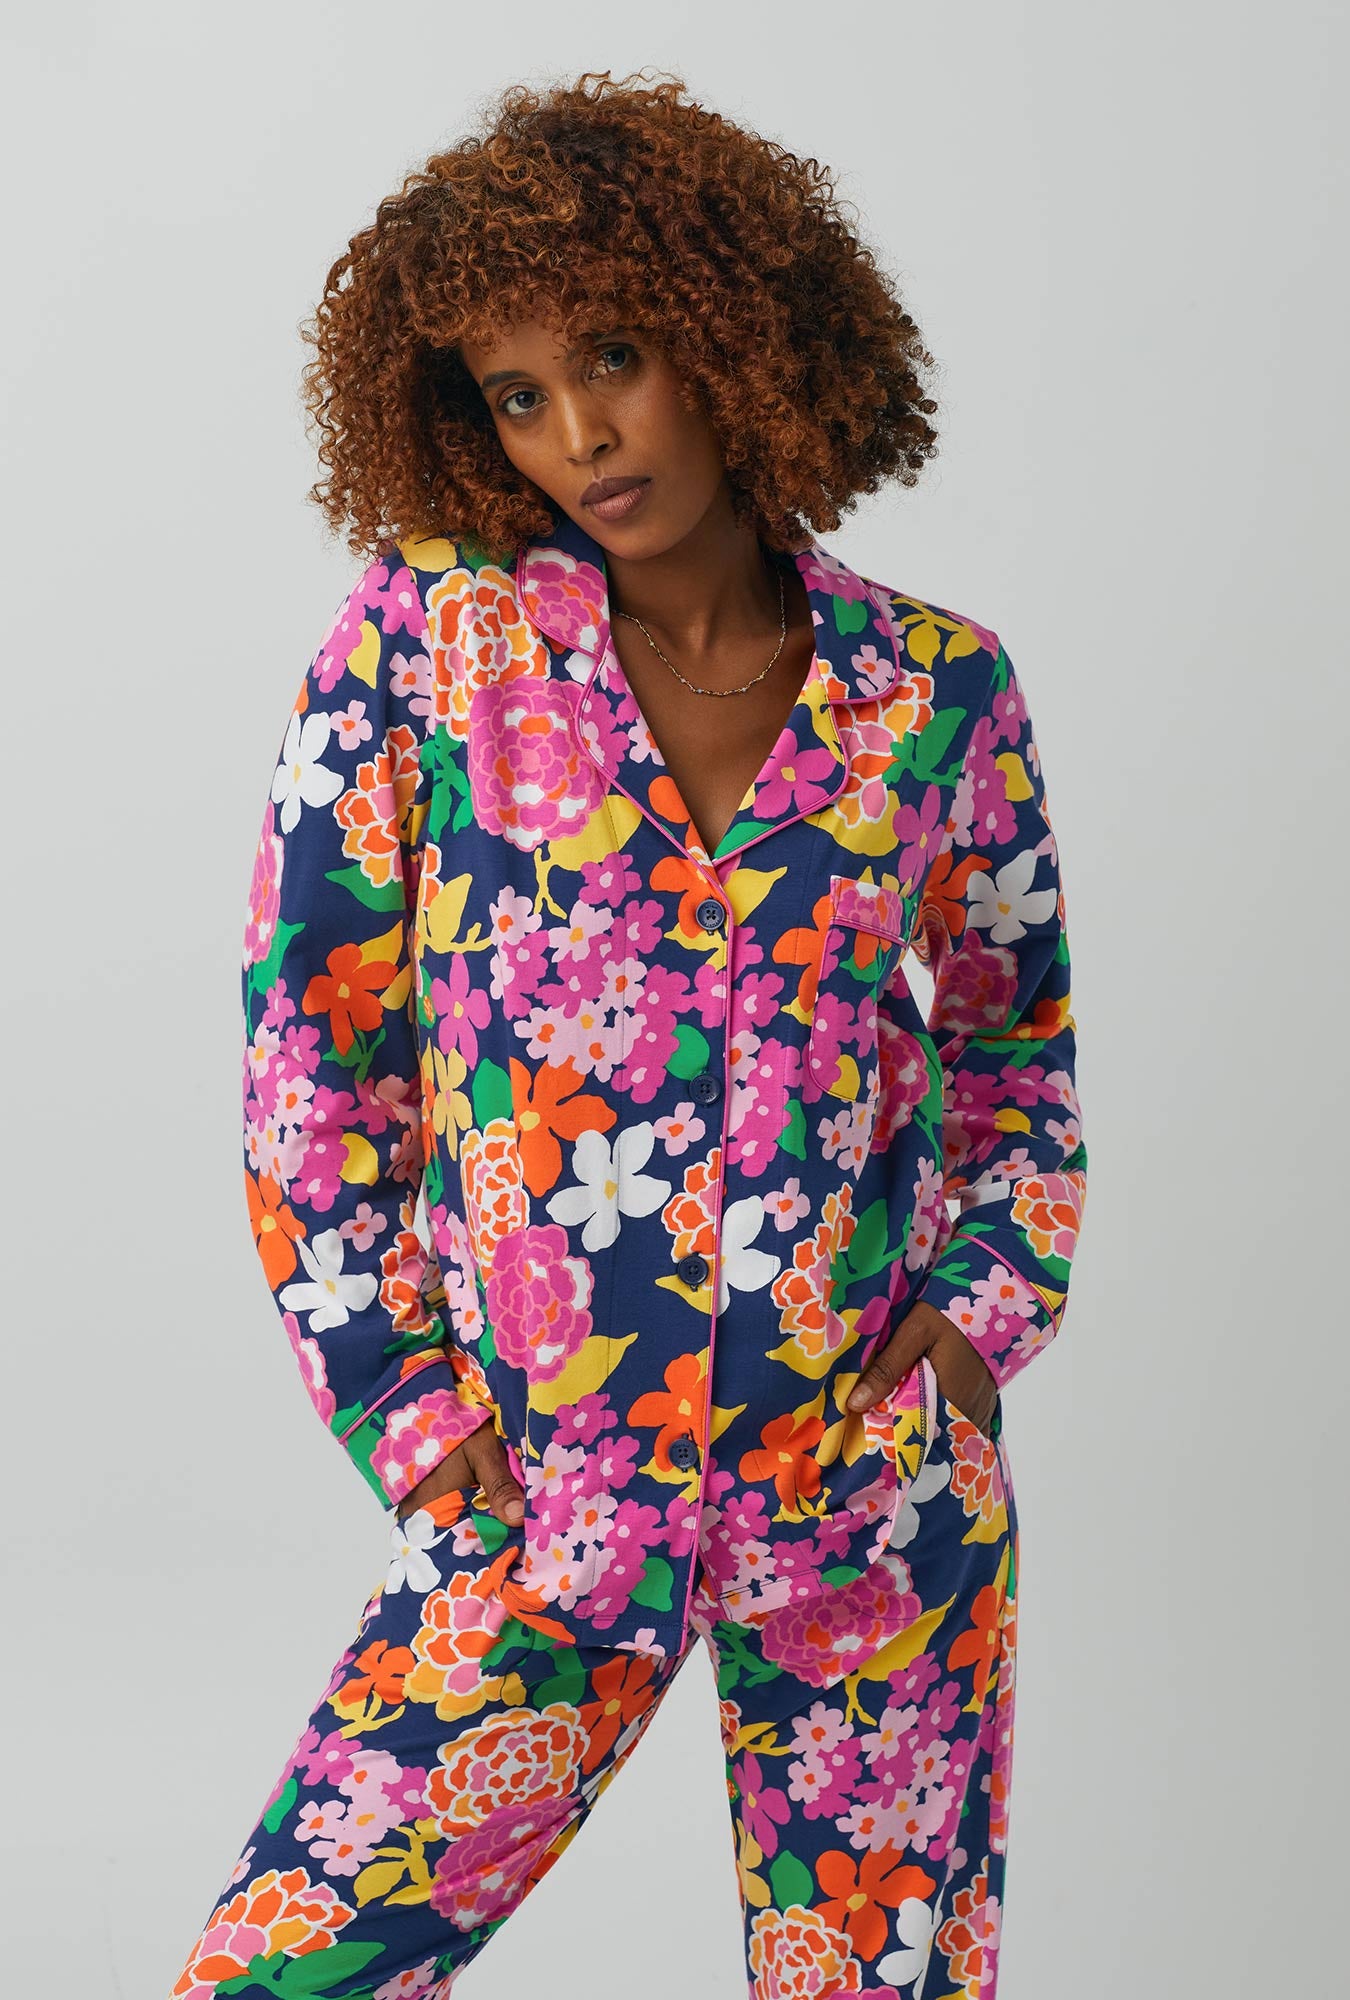 A lady wearing Long Sleeve Classic Stretch Jersey PJ Set with greenhouse floral print